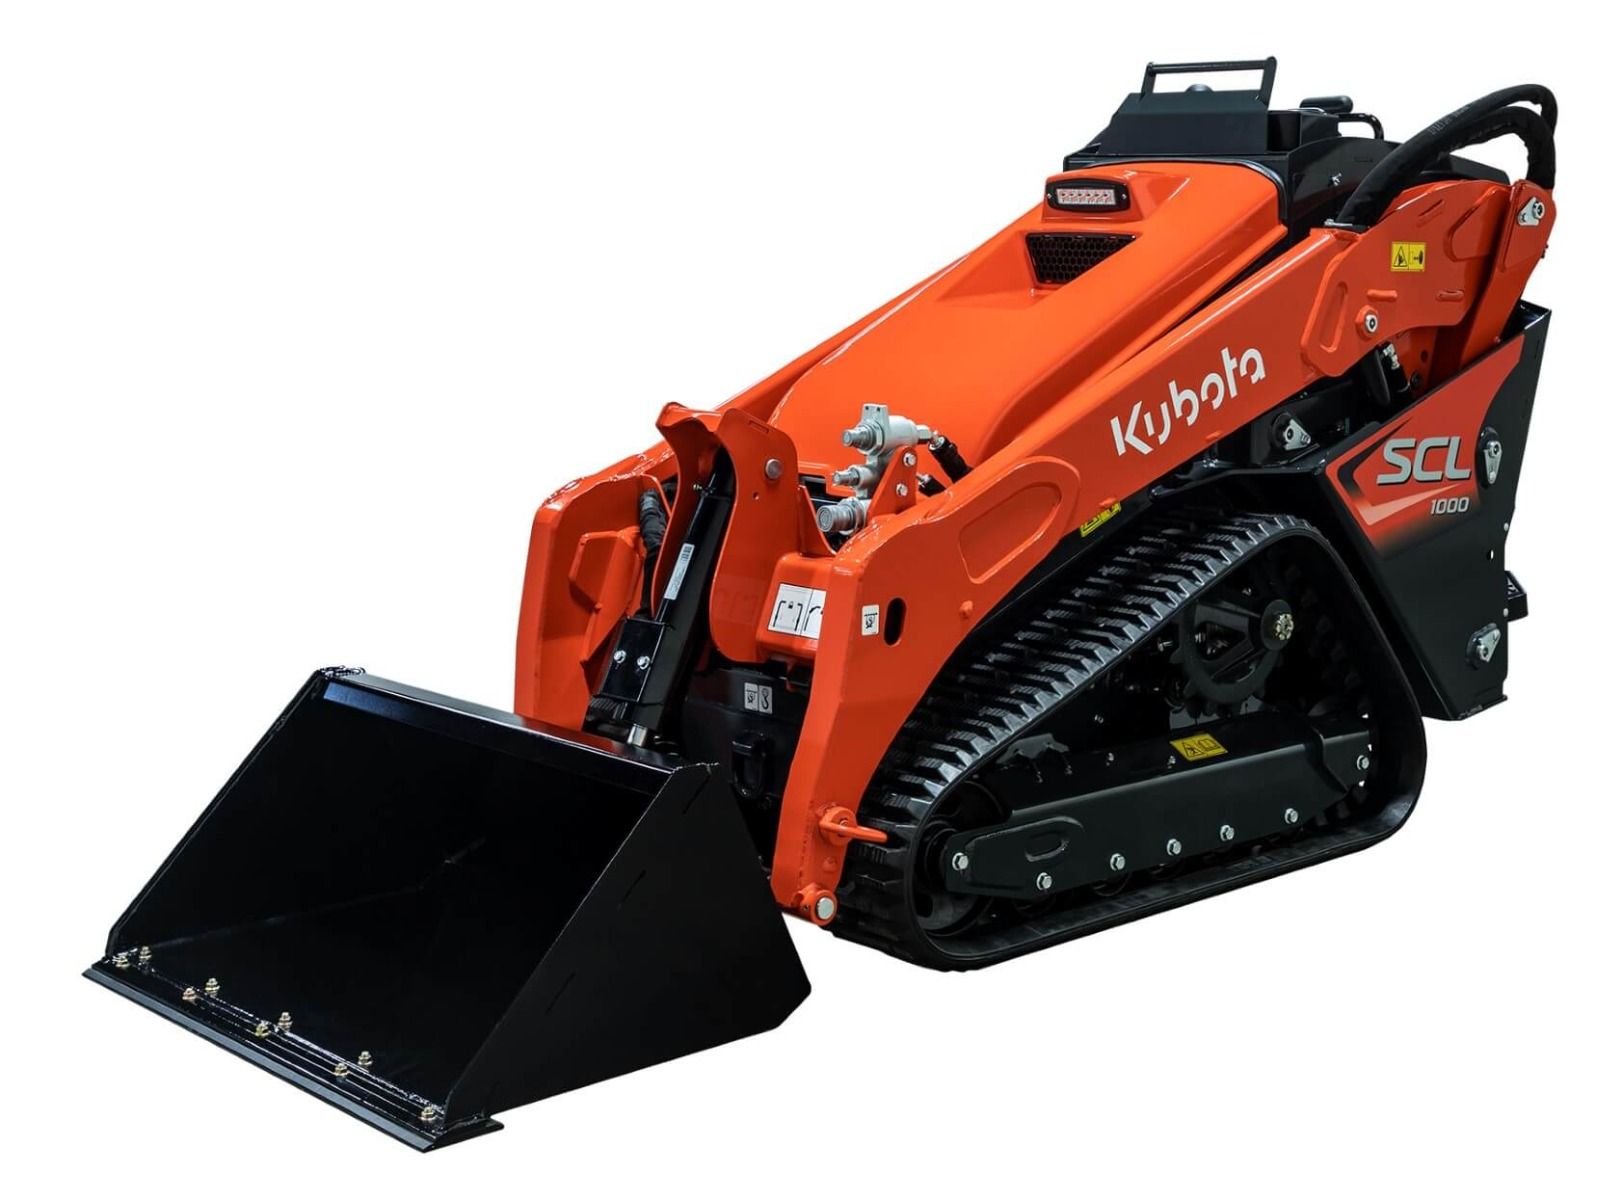 Kubota SCL 1000 Stand-On Compact Track Loader